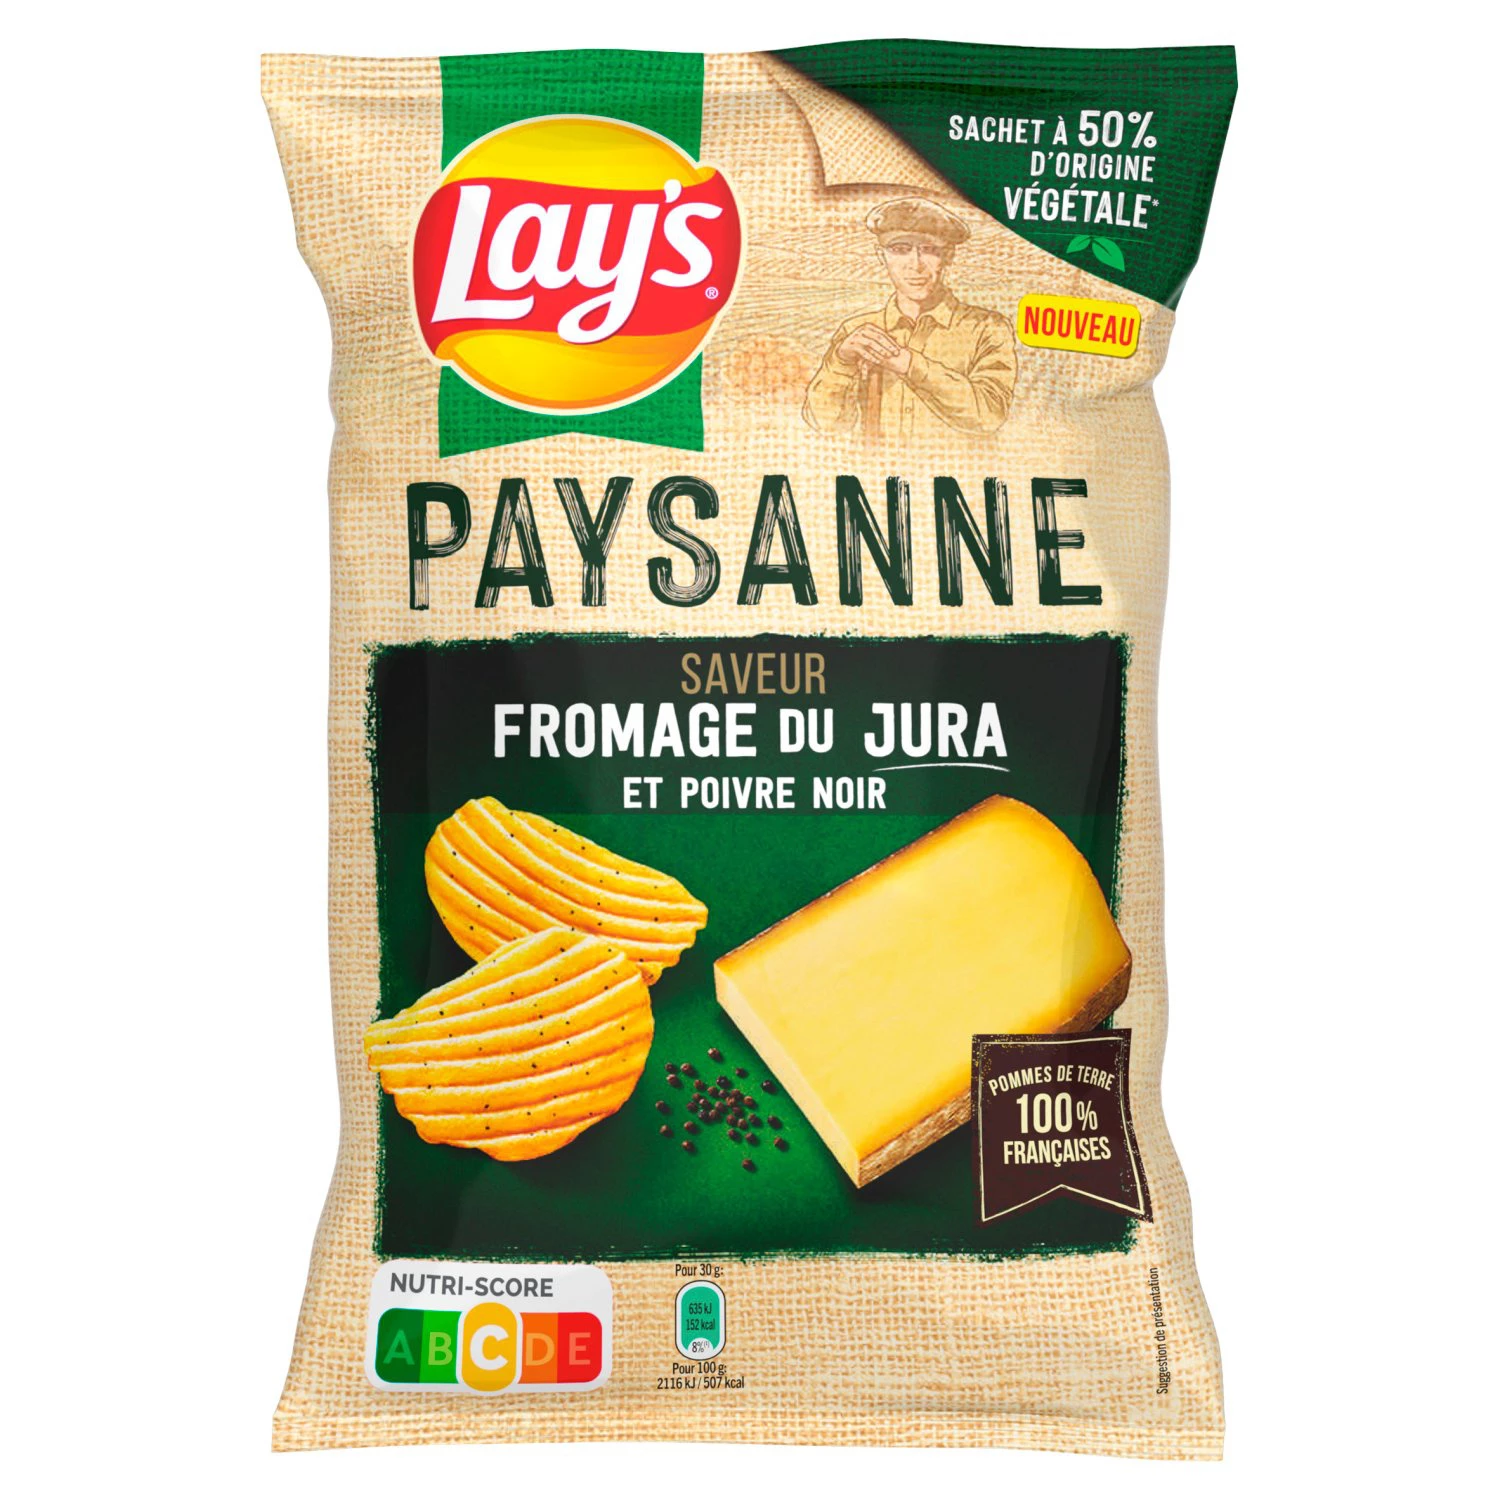 Chips Peasant Recipe Jura Cheese and Black Pepper Flavor, 120g - LAY'S